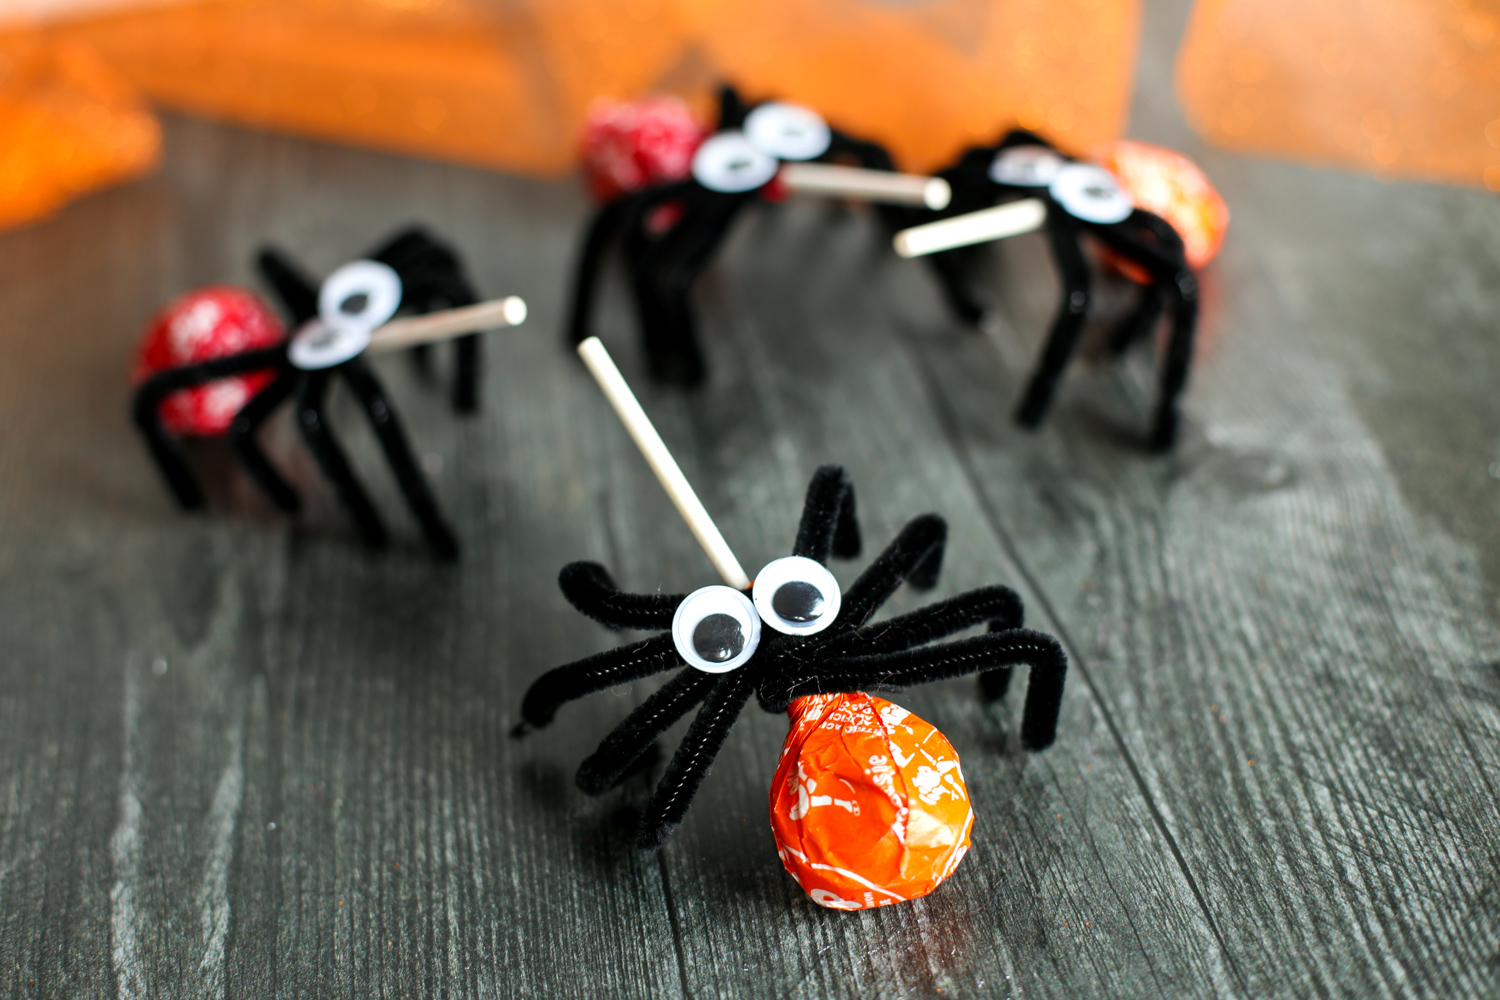 Spider lollipops sitting on a wooden table.